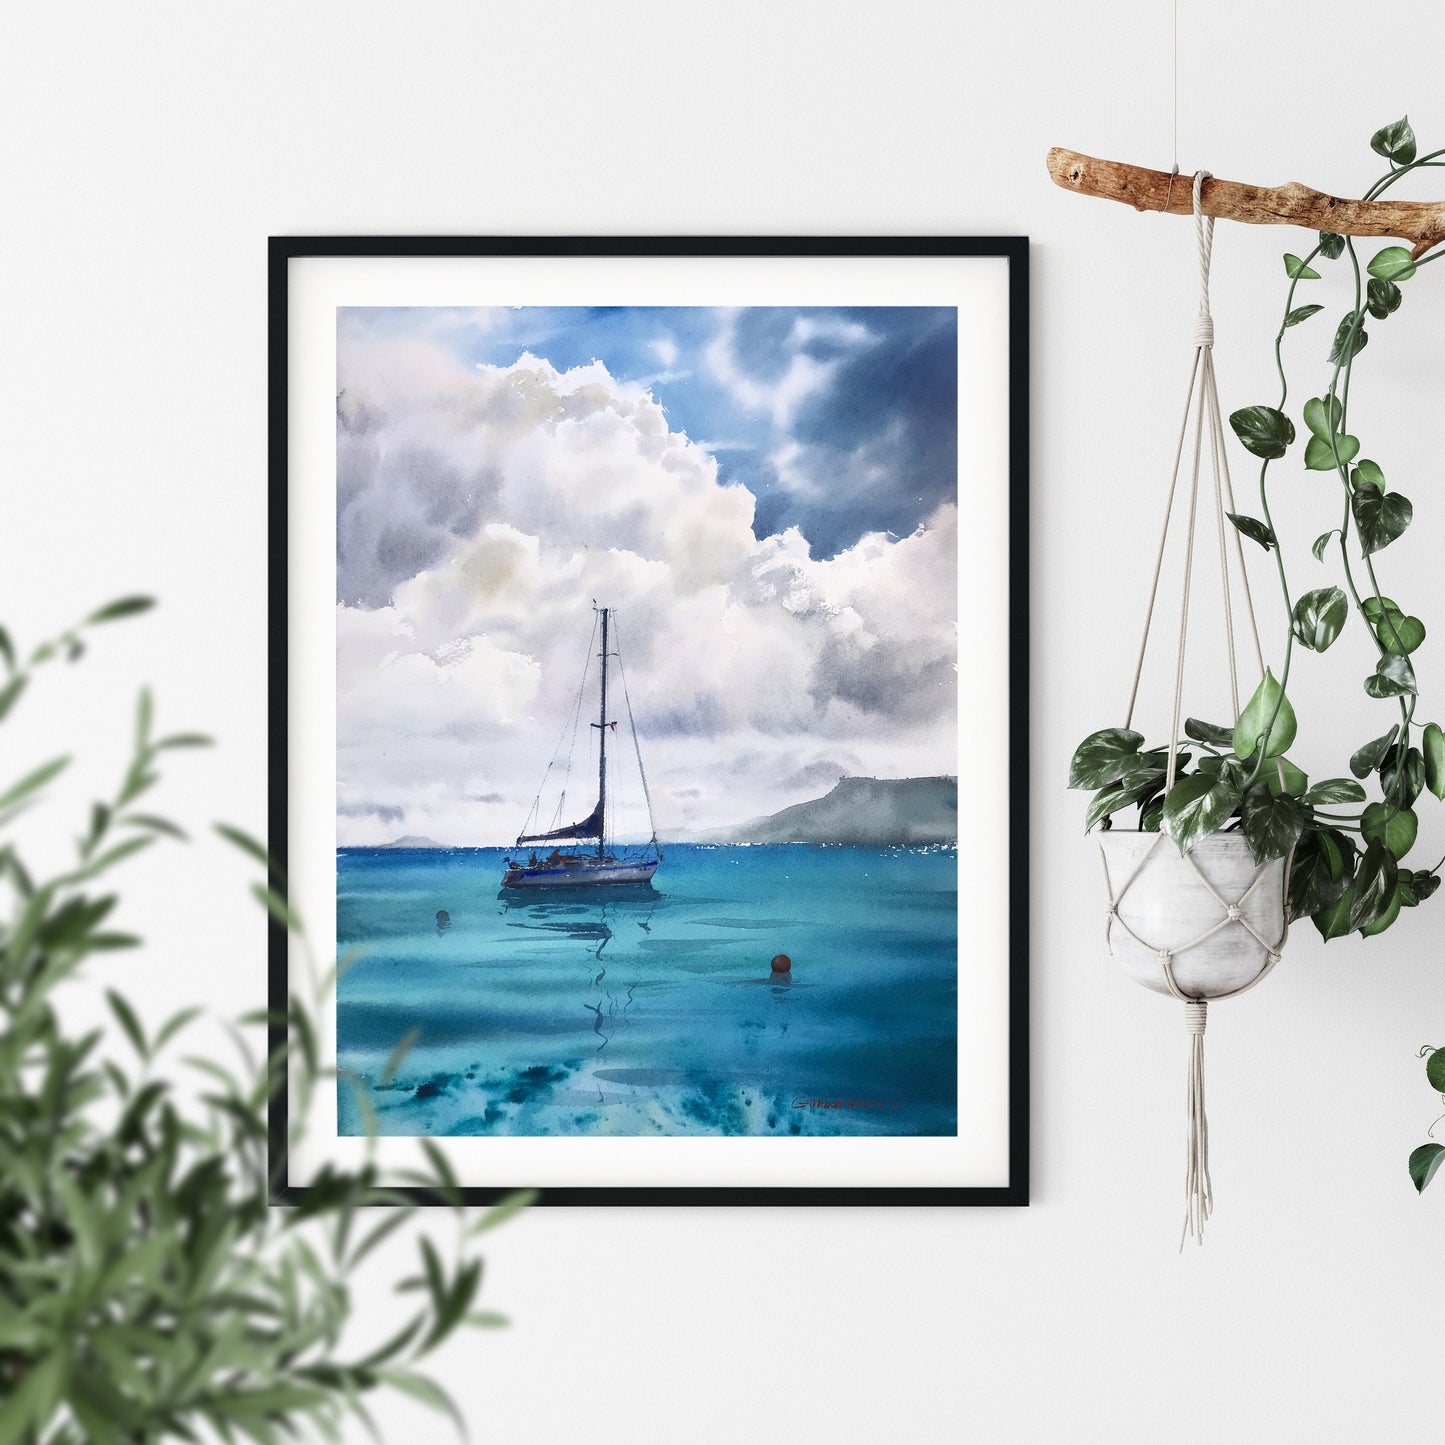 Sailboat Painting Original, Watercolour Seascape One Of a Kind Artwork, Gift for Him, Blue Sea, Yachting Art